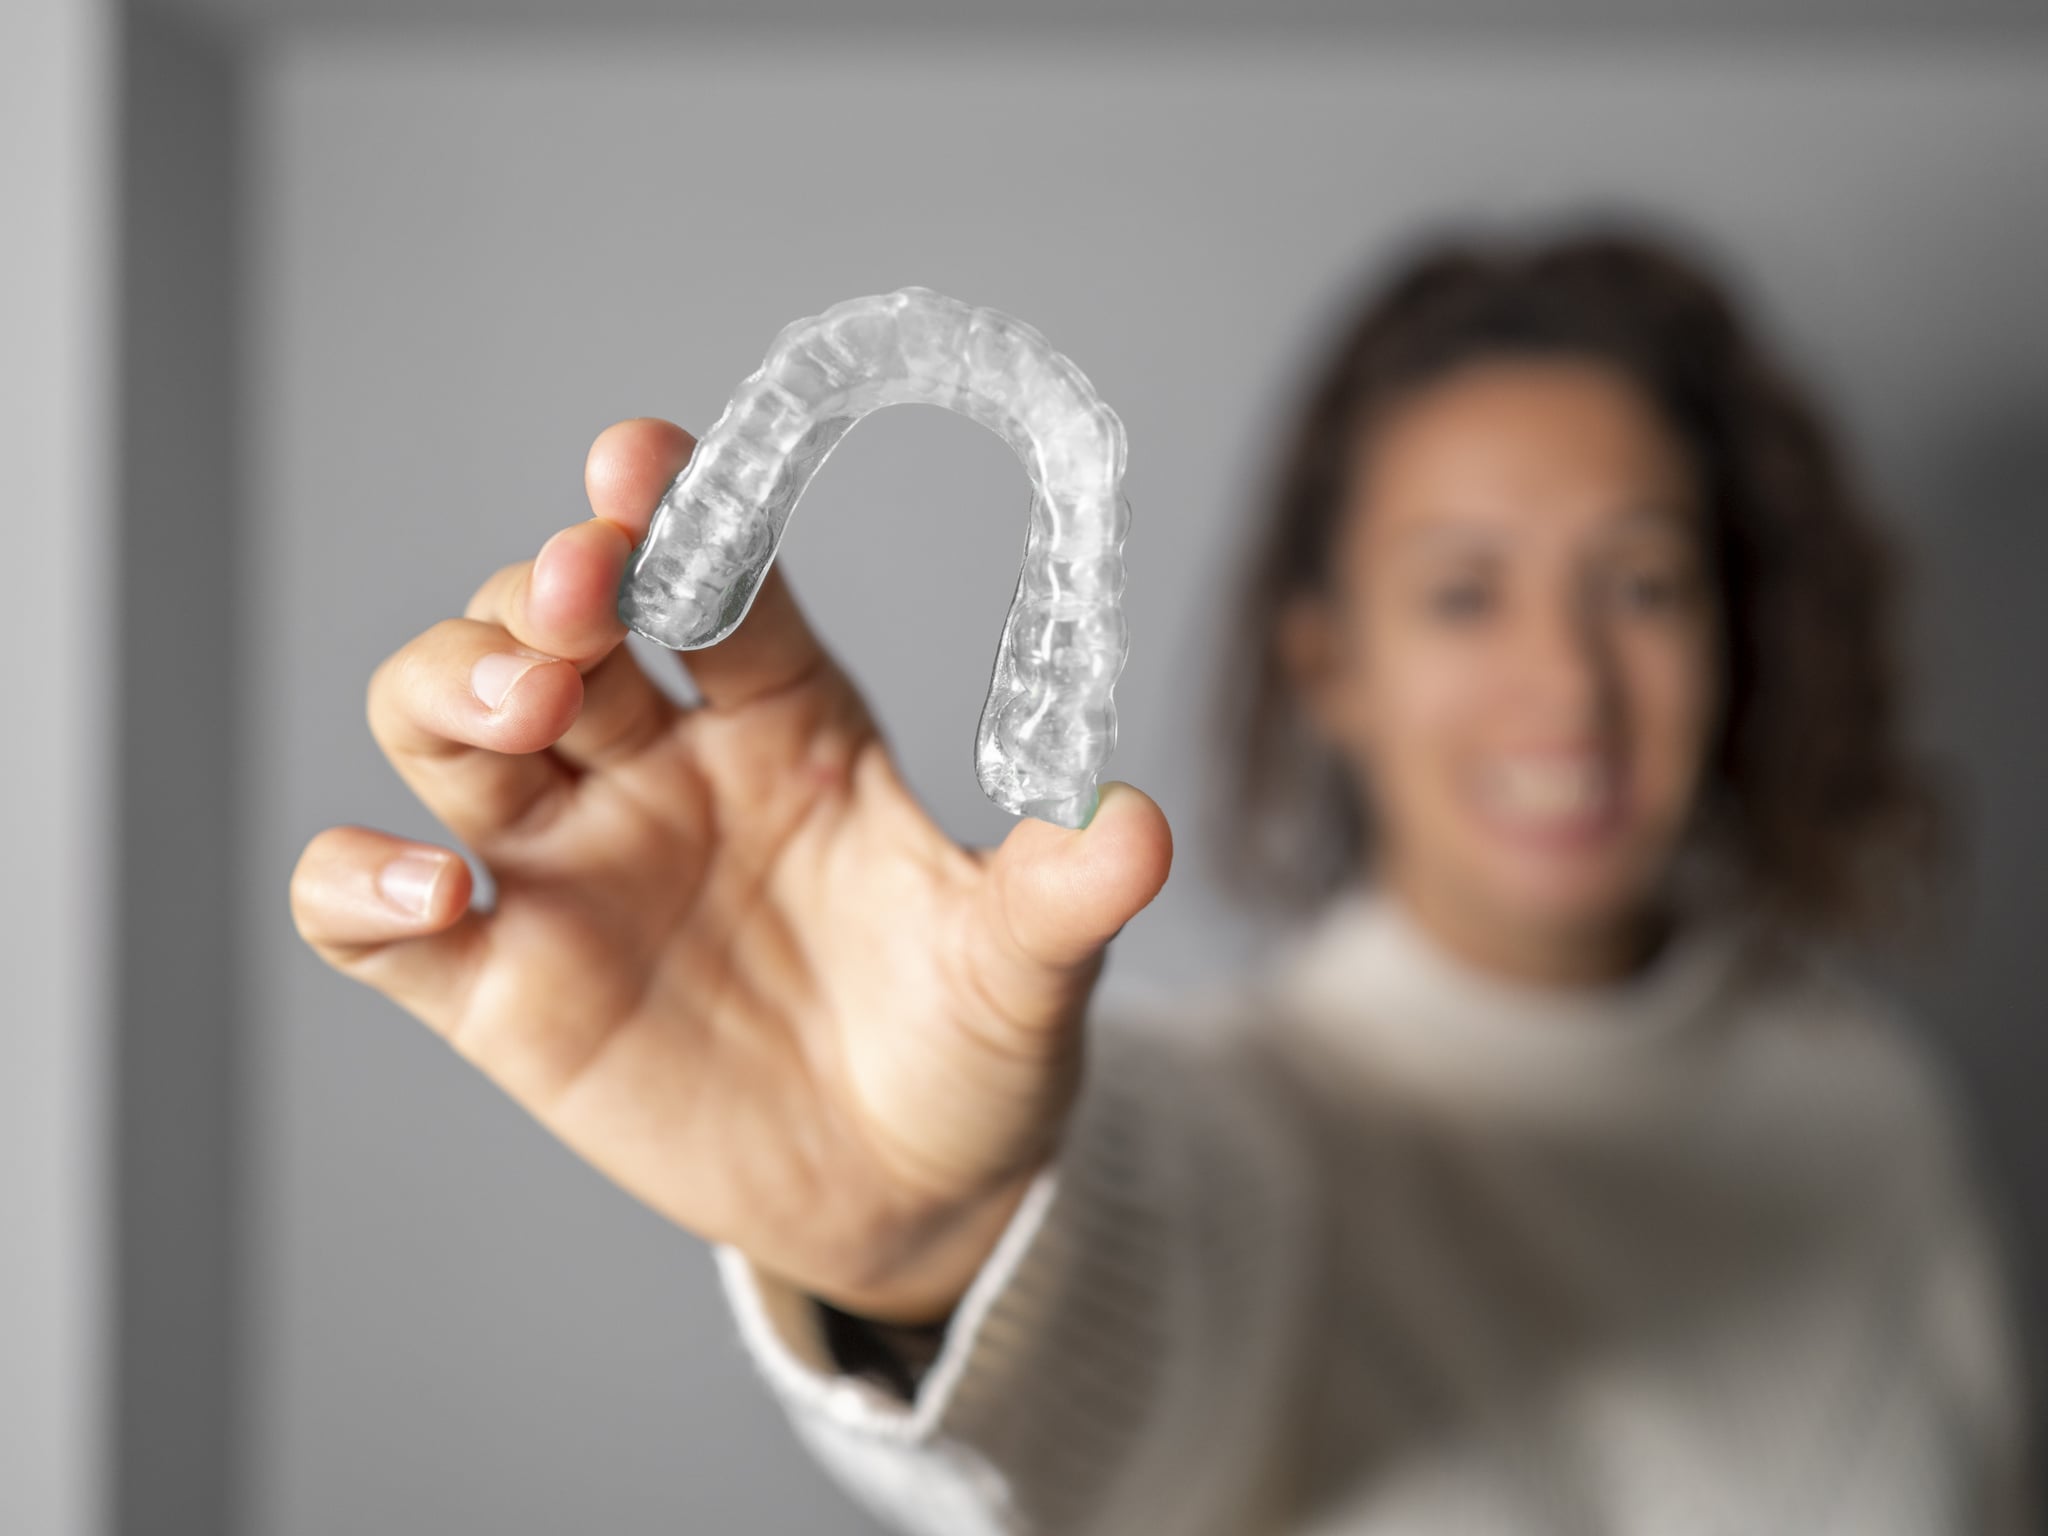 Young woman holding an invisible, transparent translucent orthodontics. Focus on orthodontics.